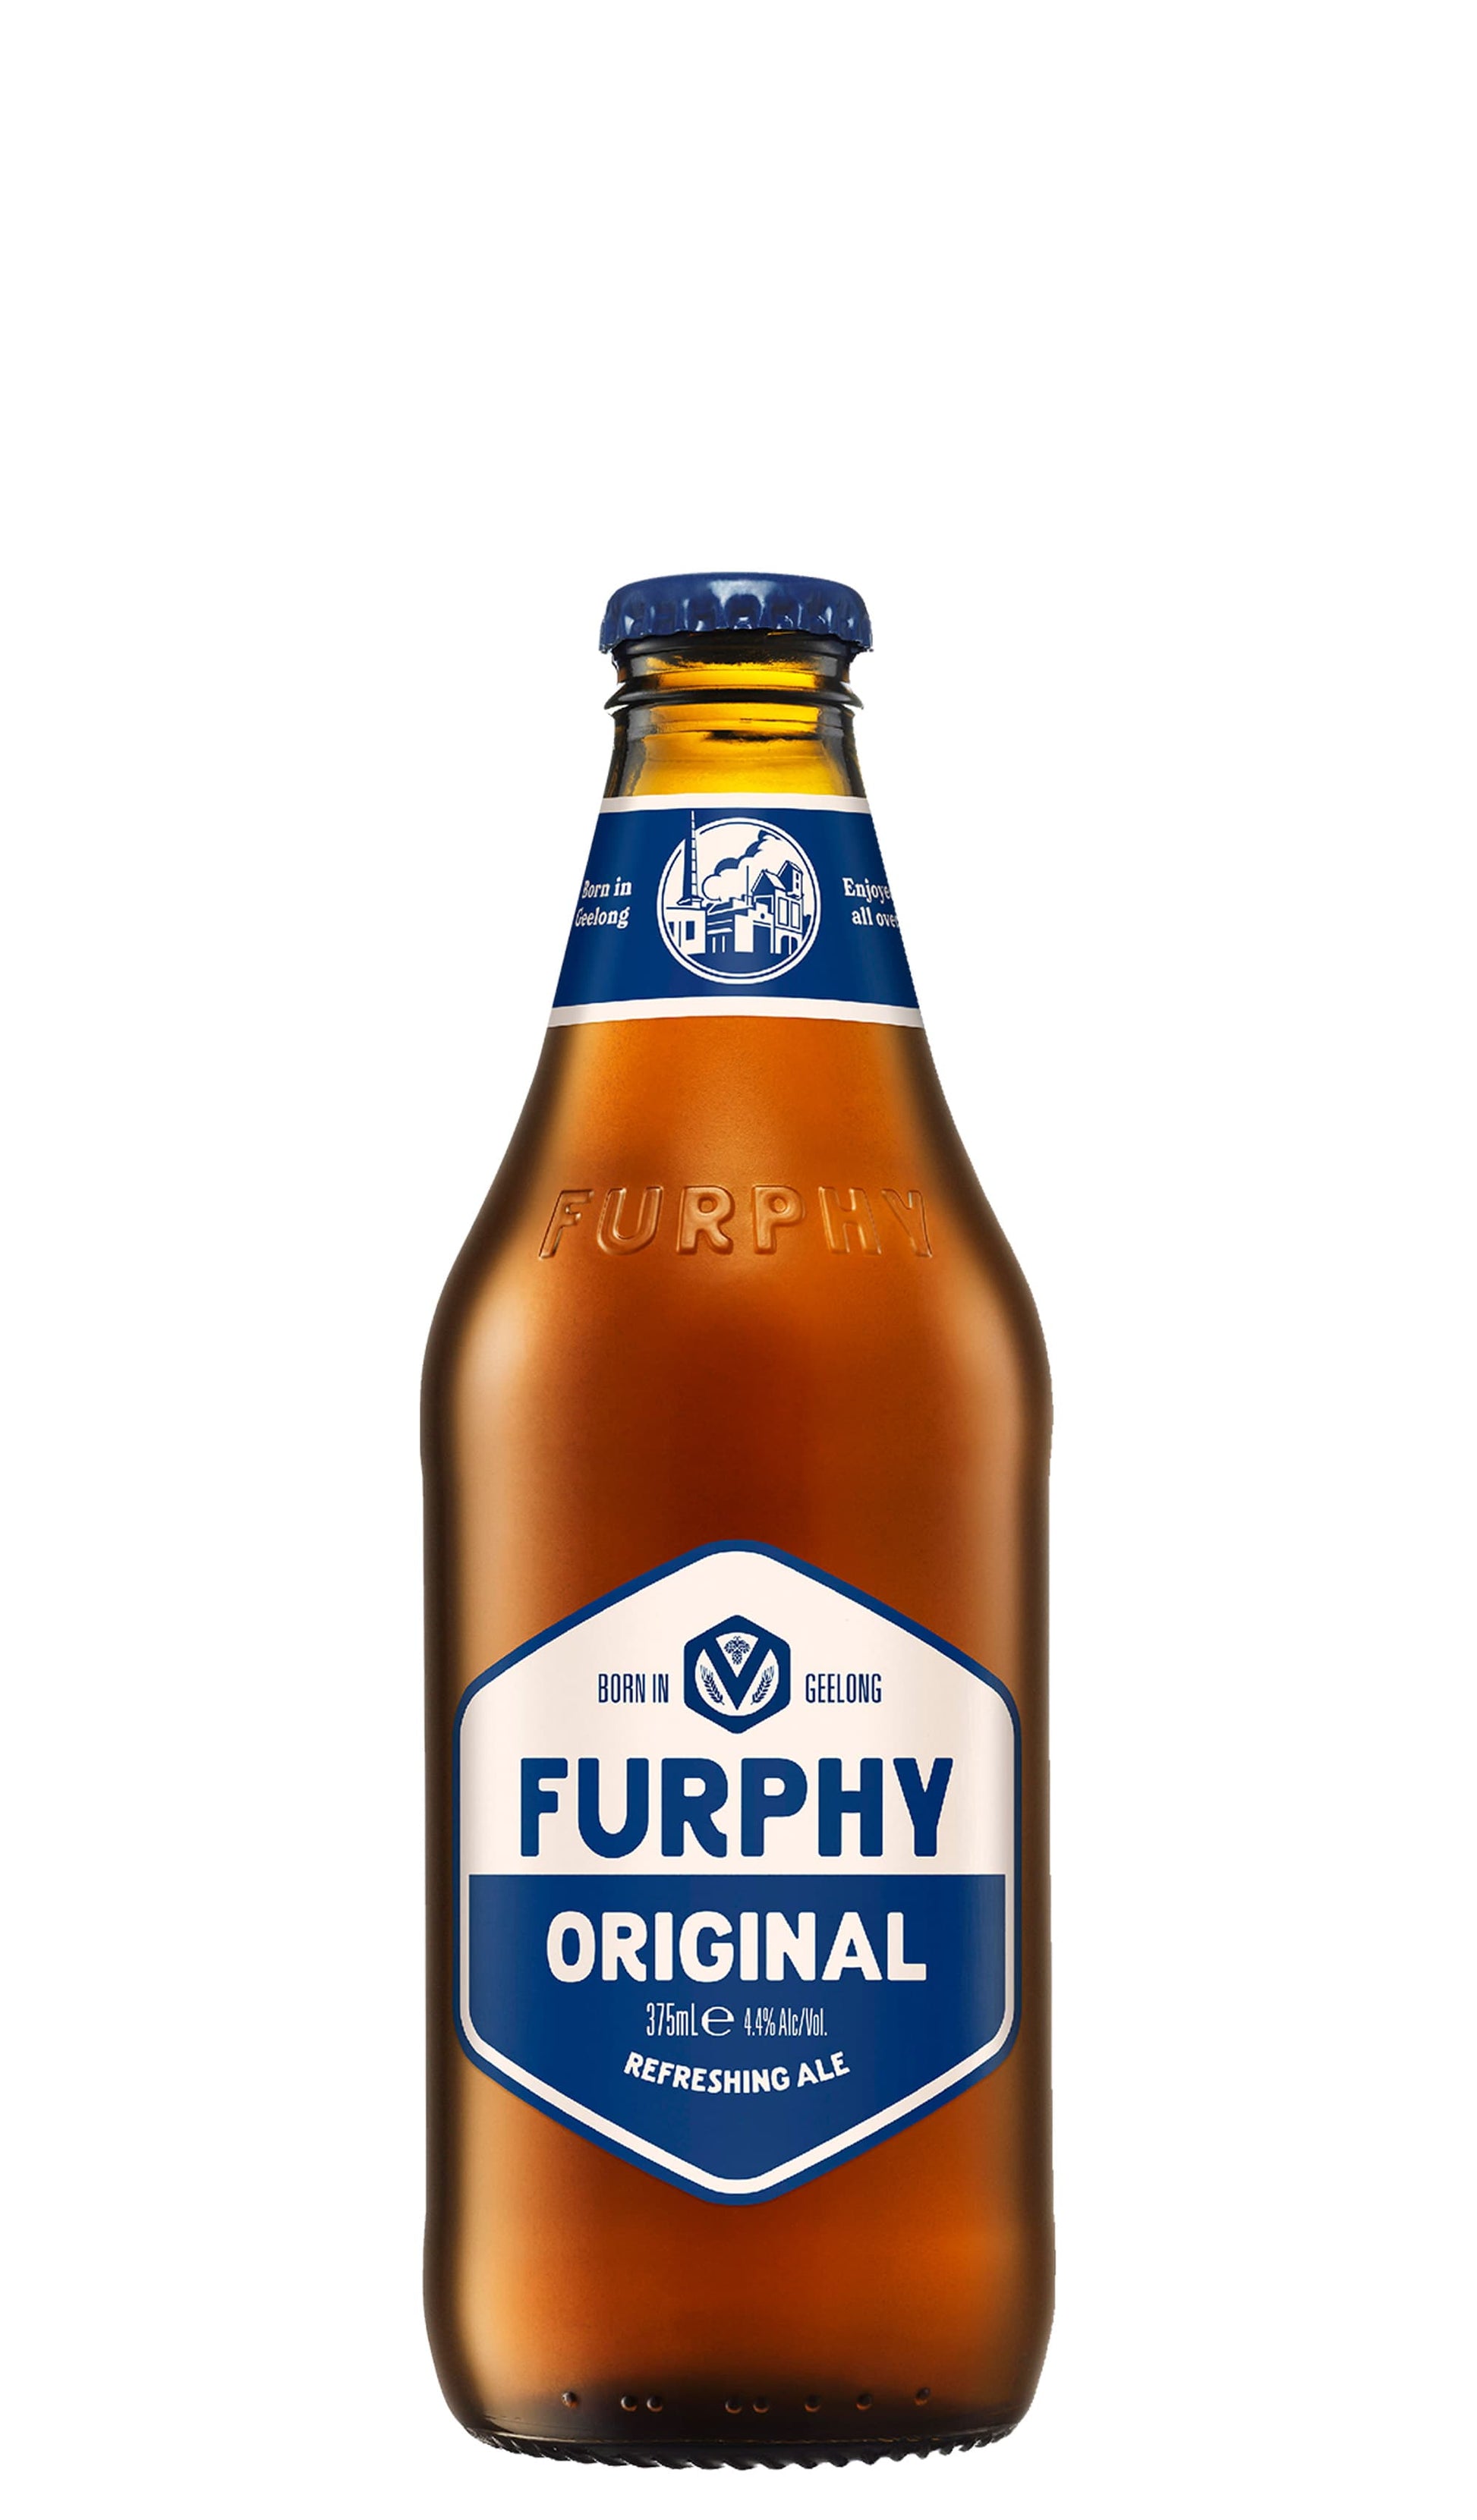 Find out more, explore the range and purchase Furphy Original Refreshing Ale available at Wine Sellers Direct - Australia's independent liquor specialists.